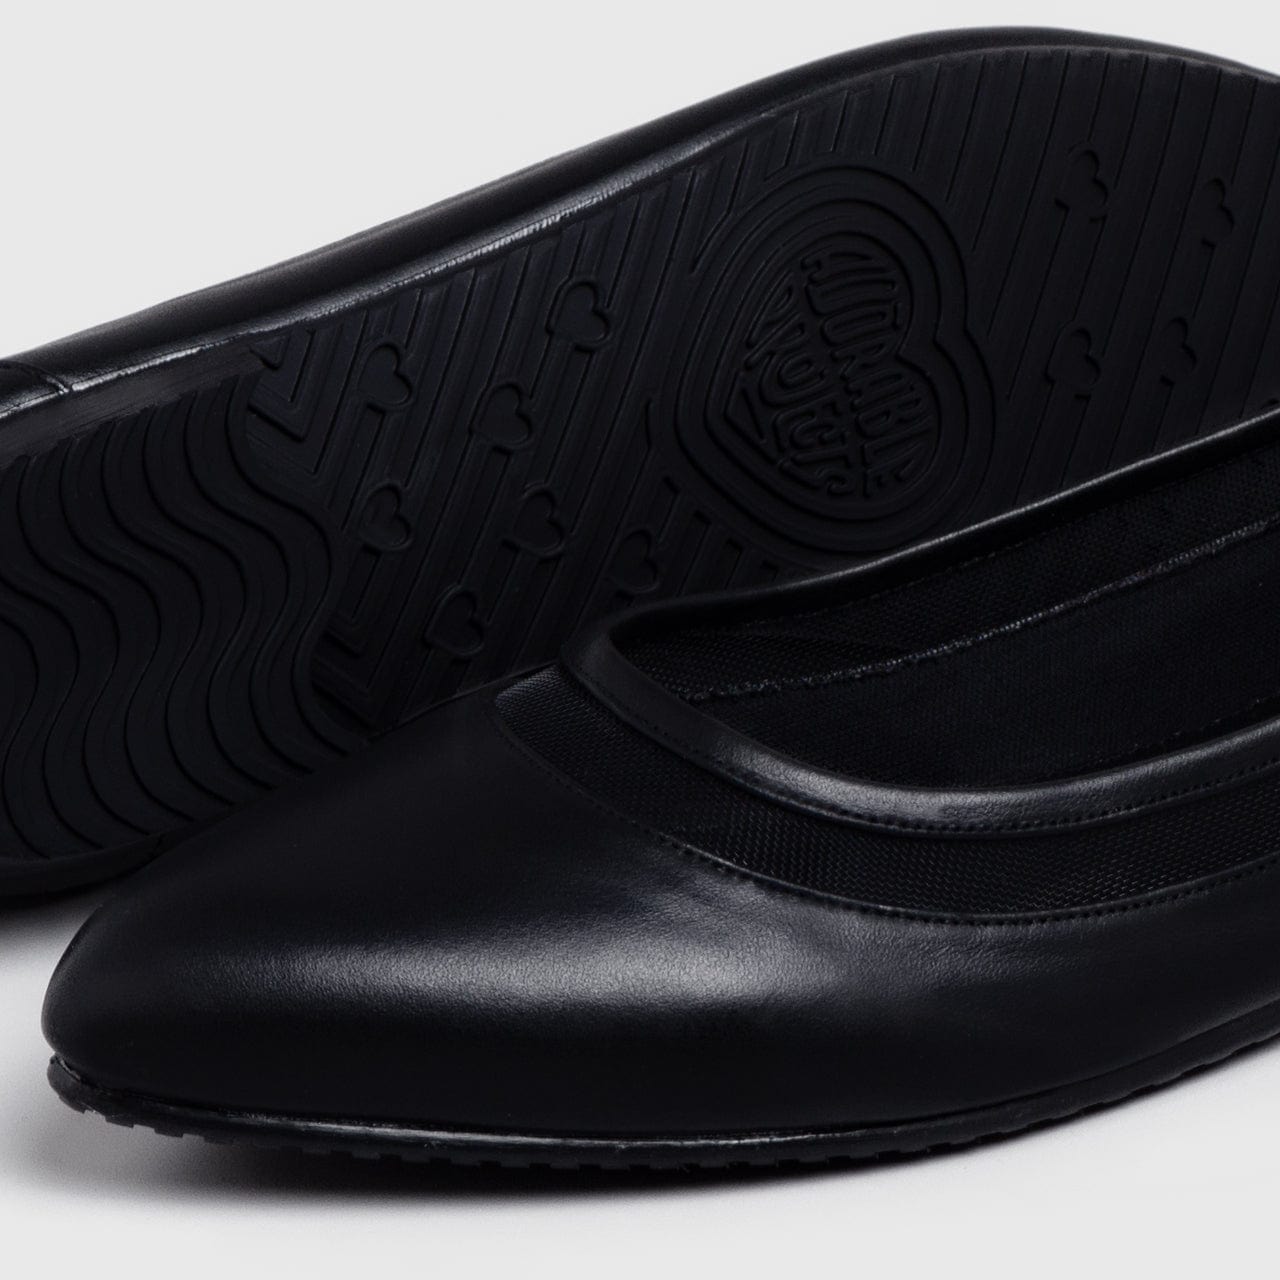 Adorable Projects Official Adorableprojects - Hushfire Flat Shoes Genuine Leather Black